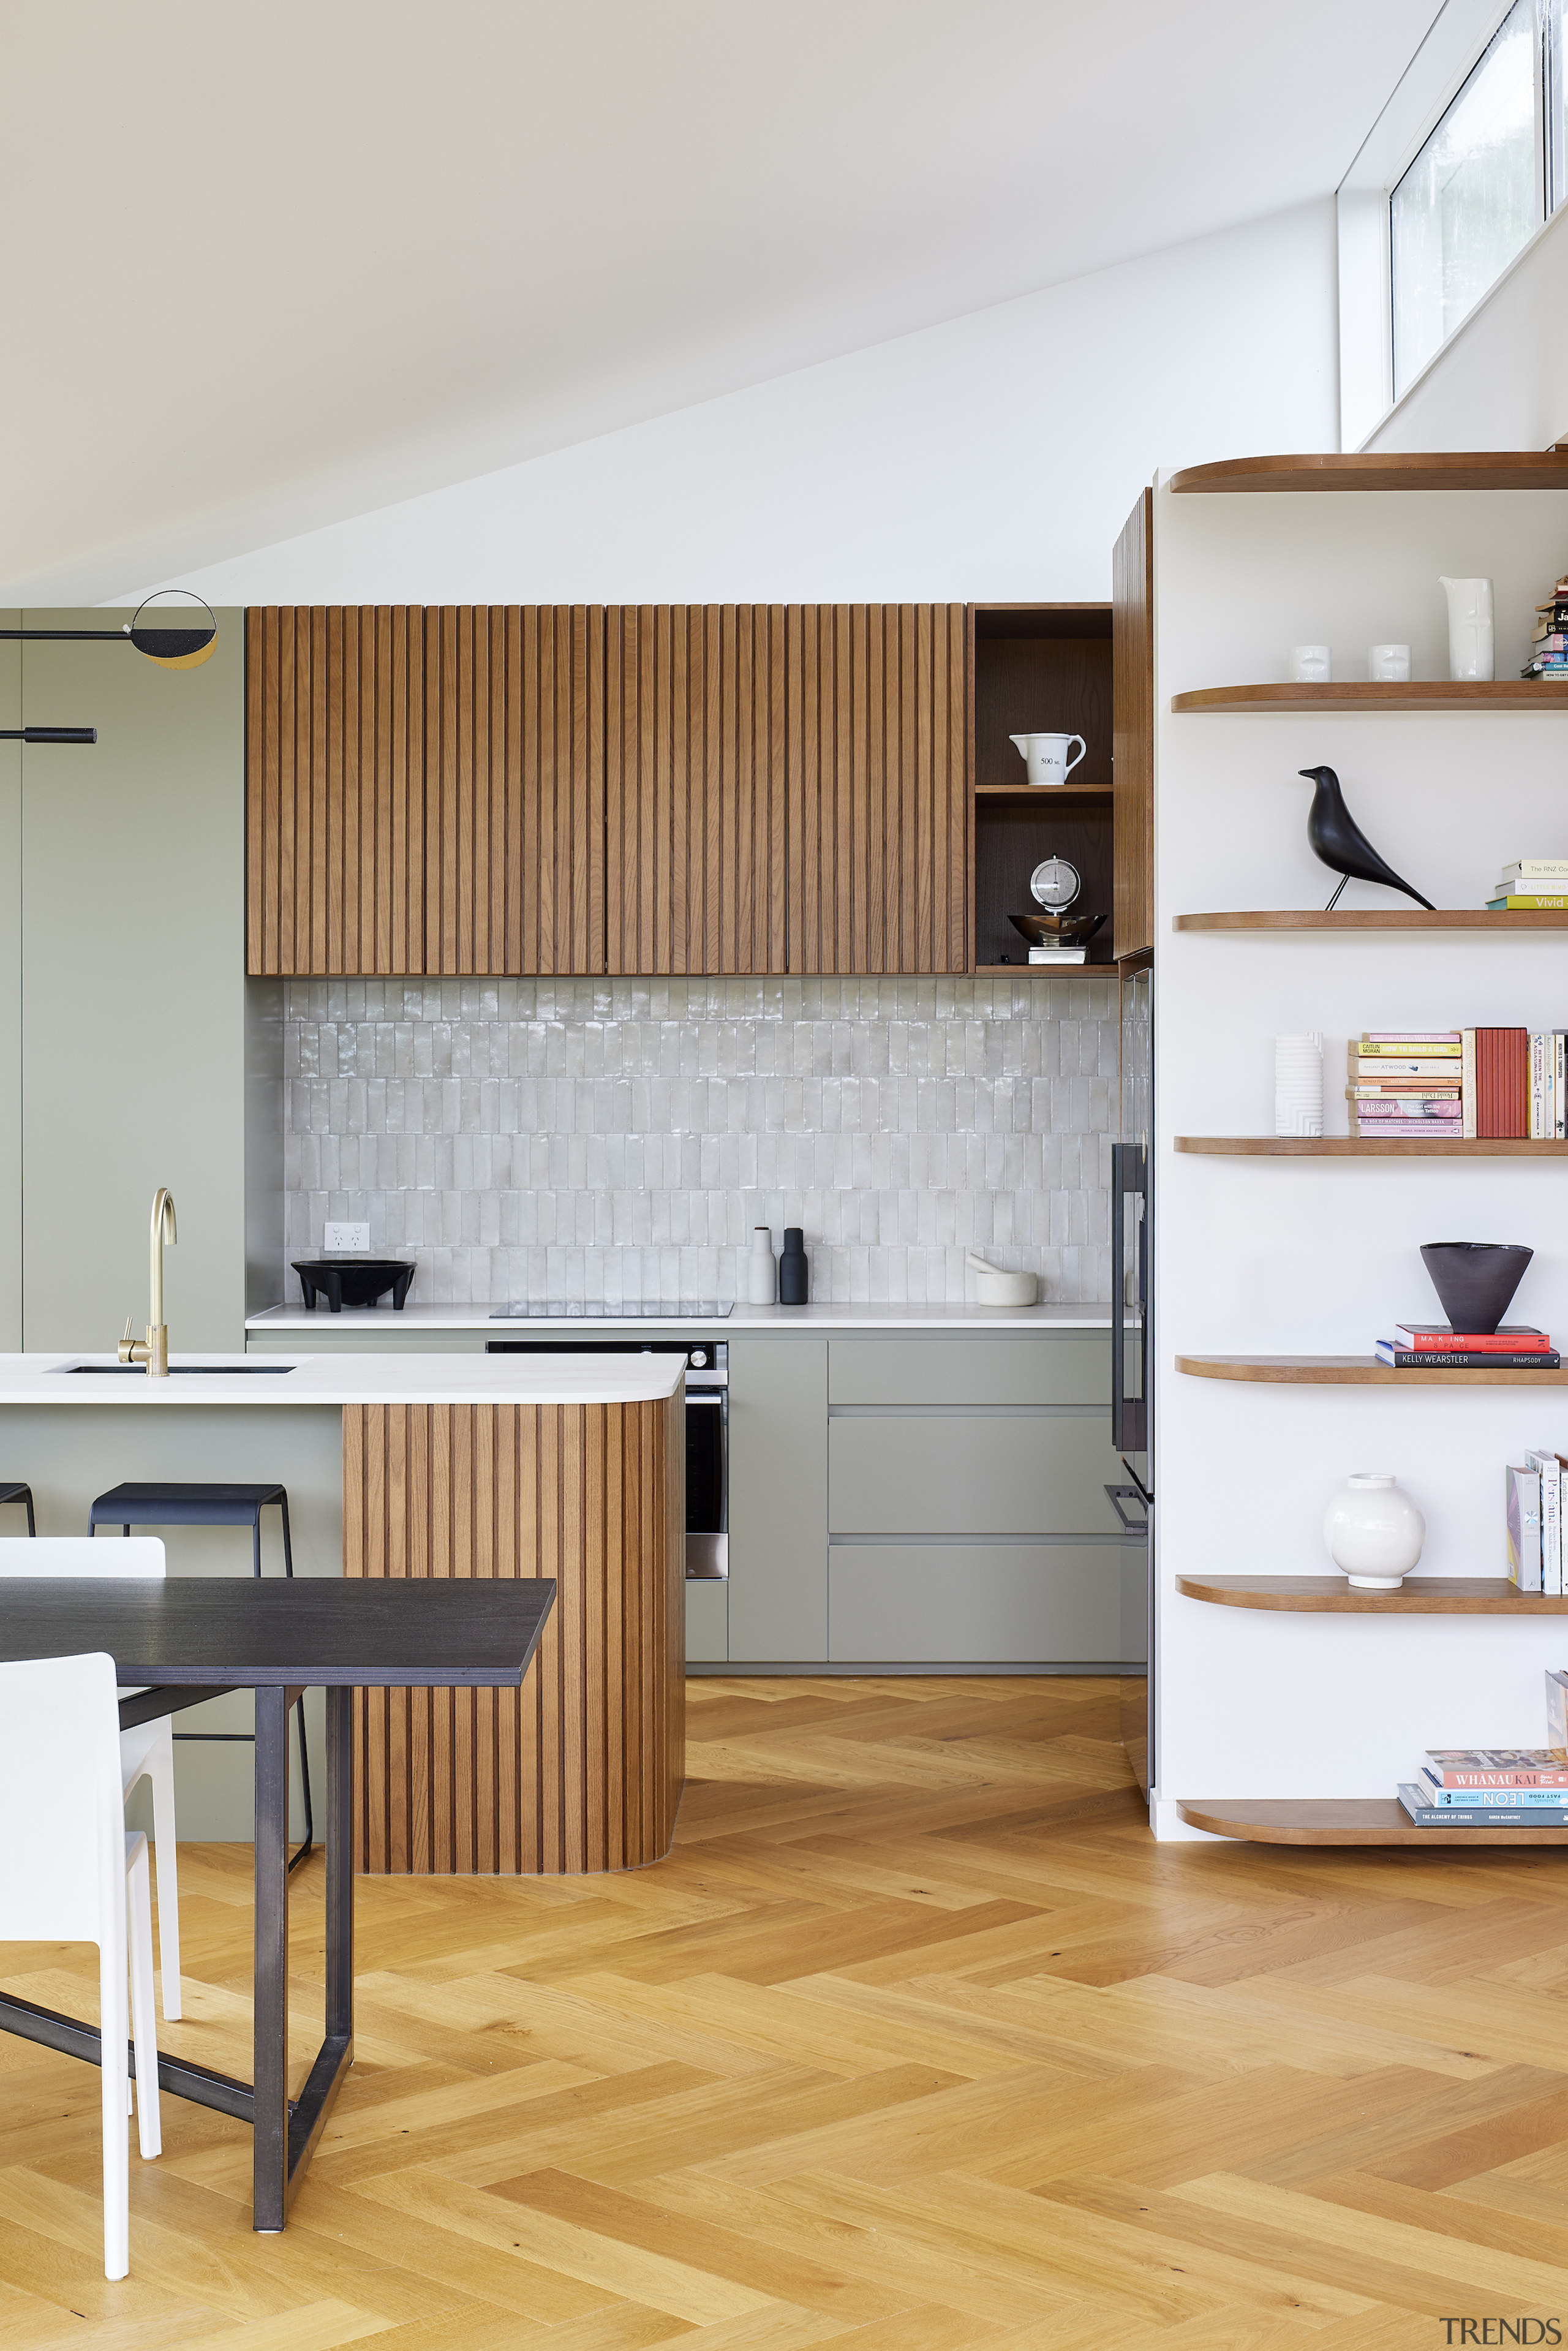 An open shelving unit integrates into the main 